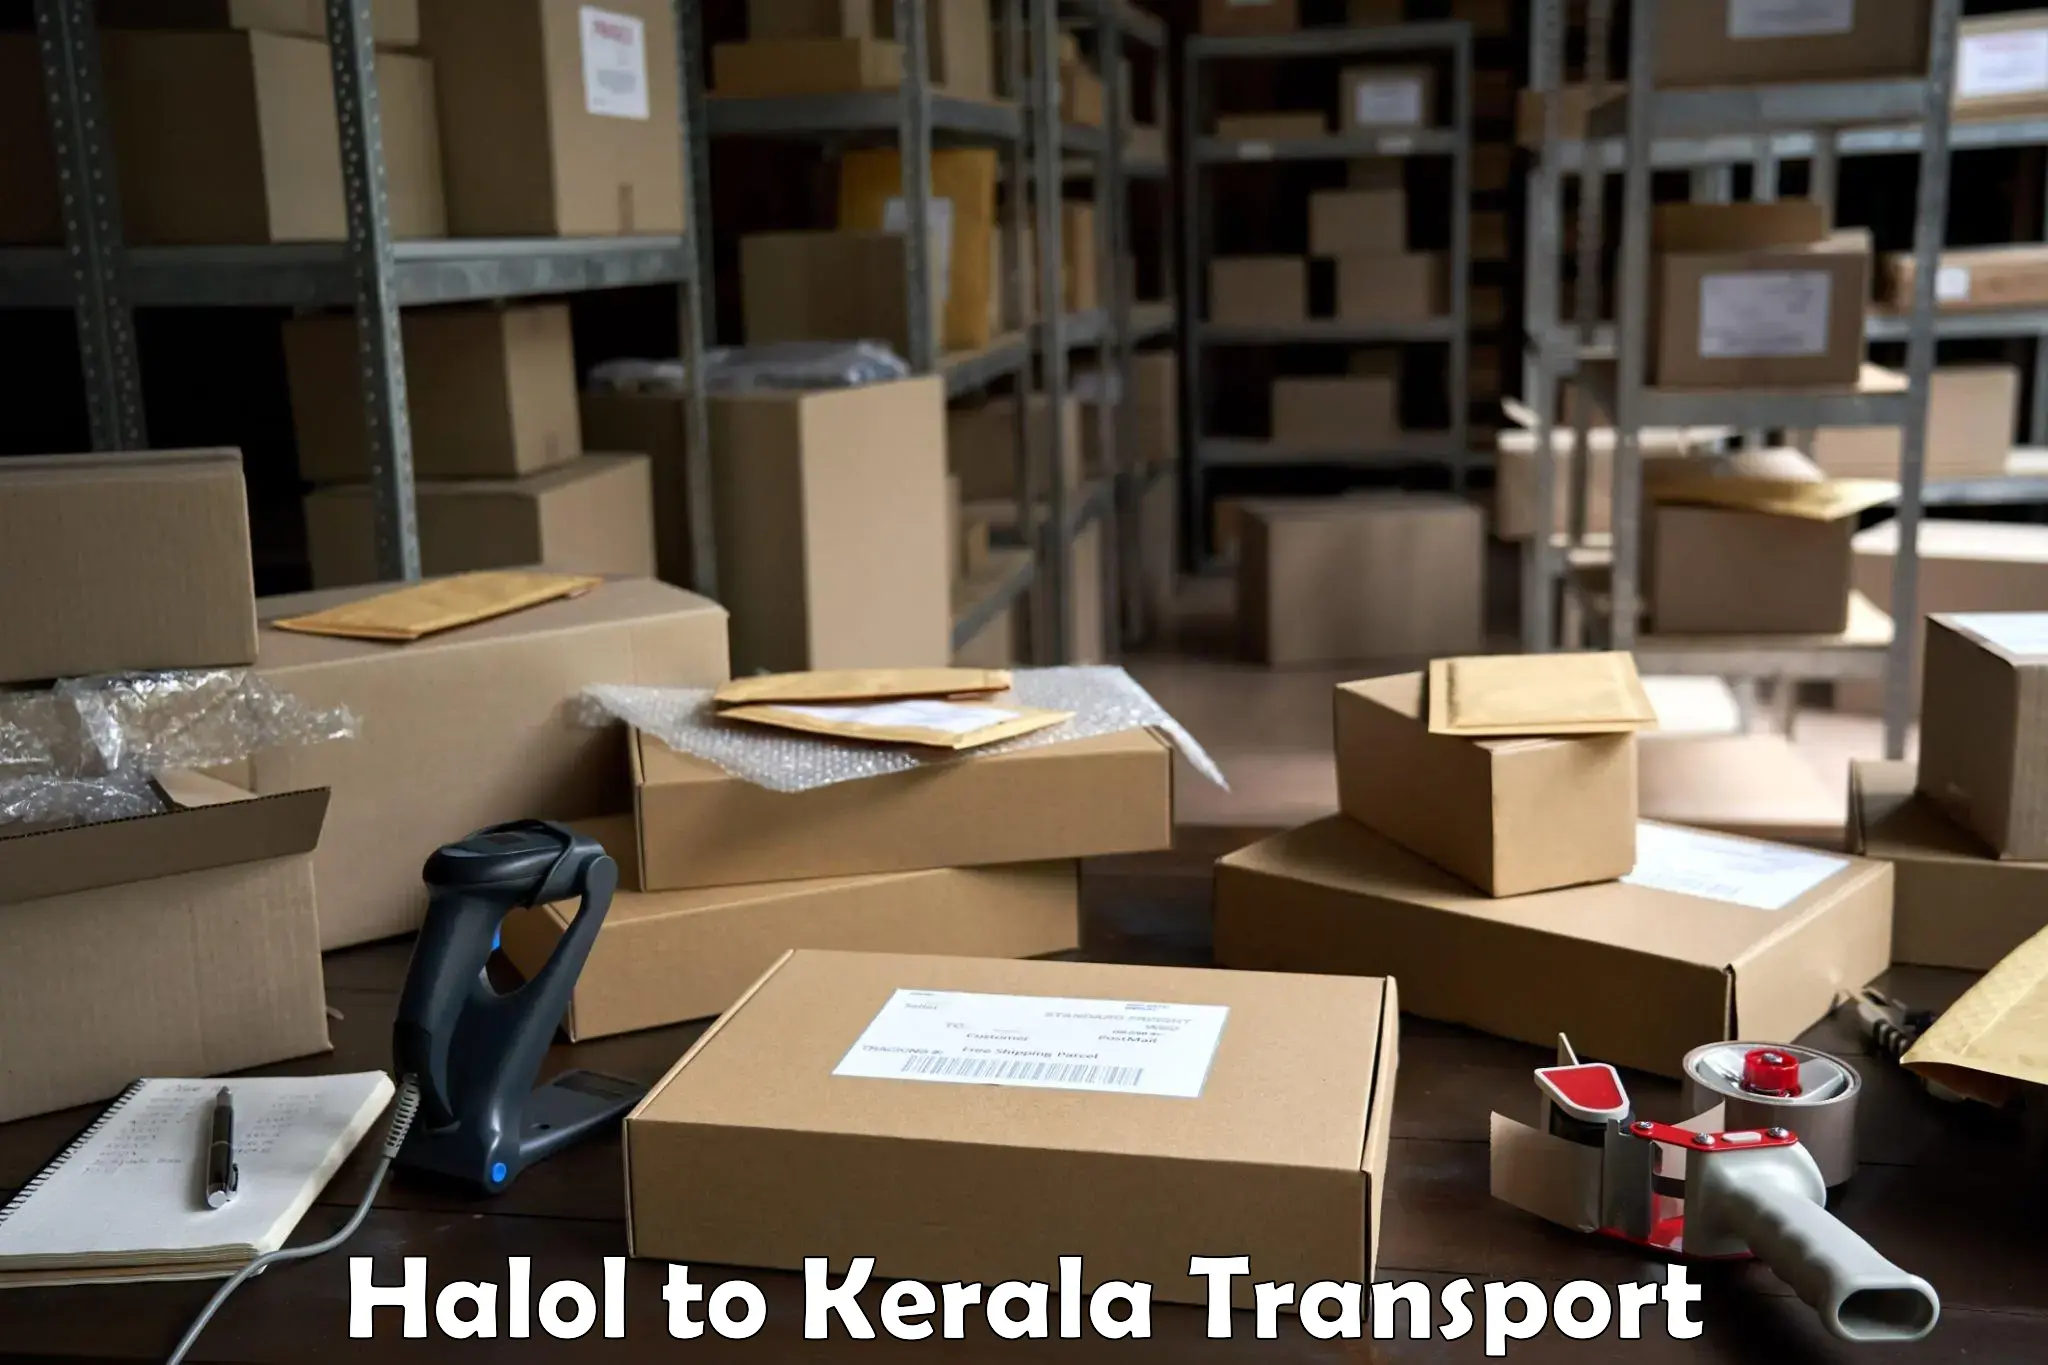 Transportation services Halol to Cochin University of Science and Technology